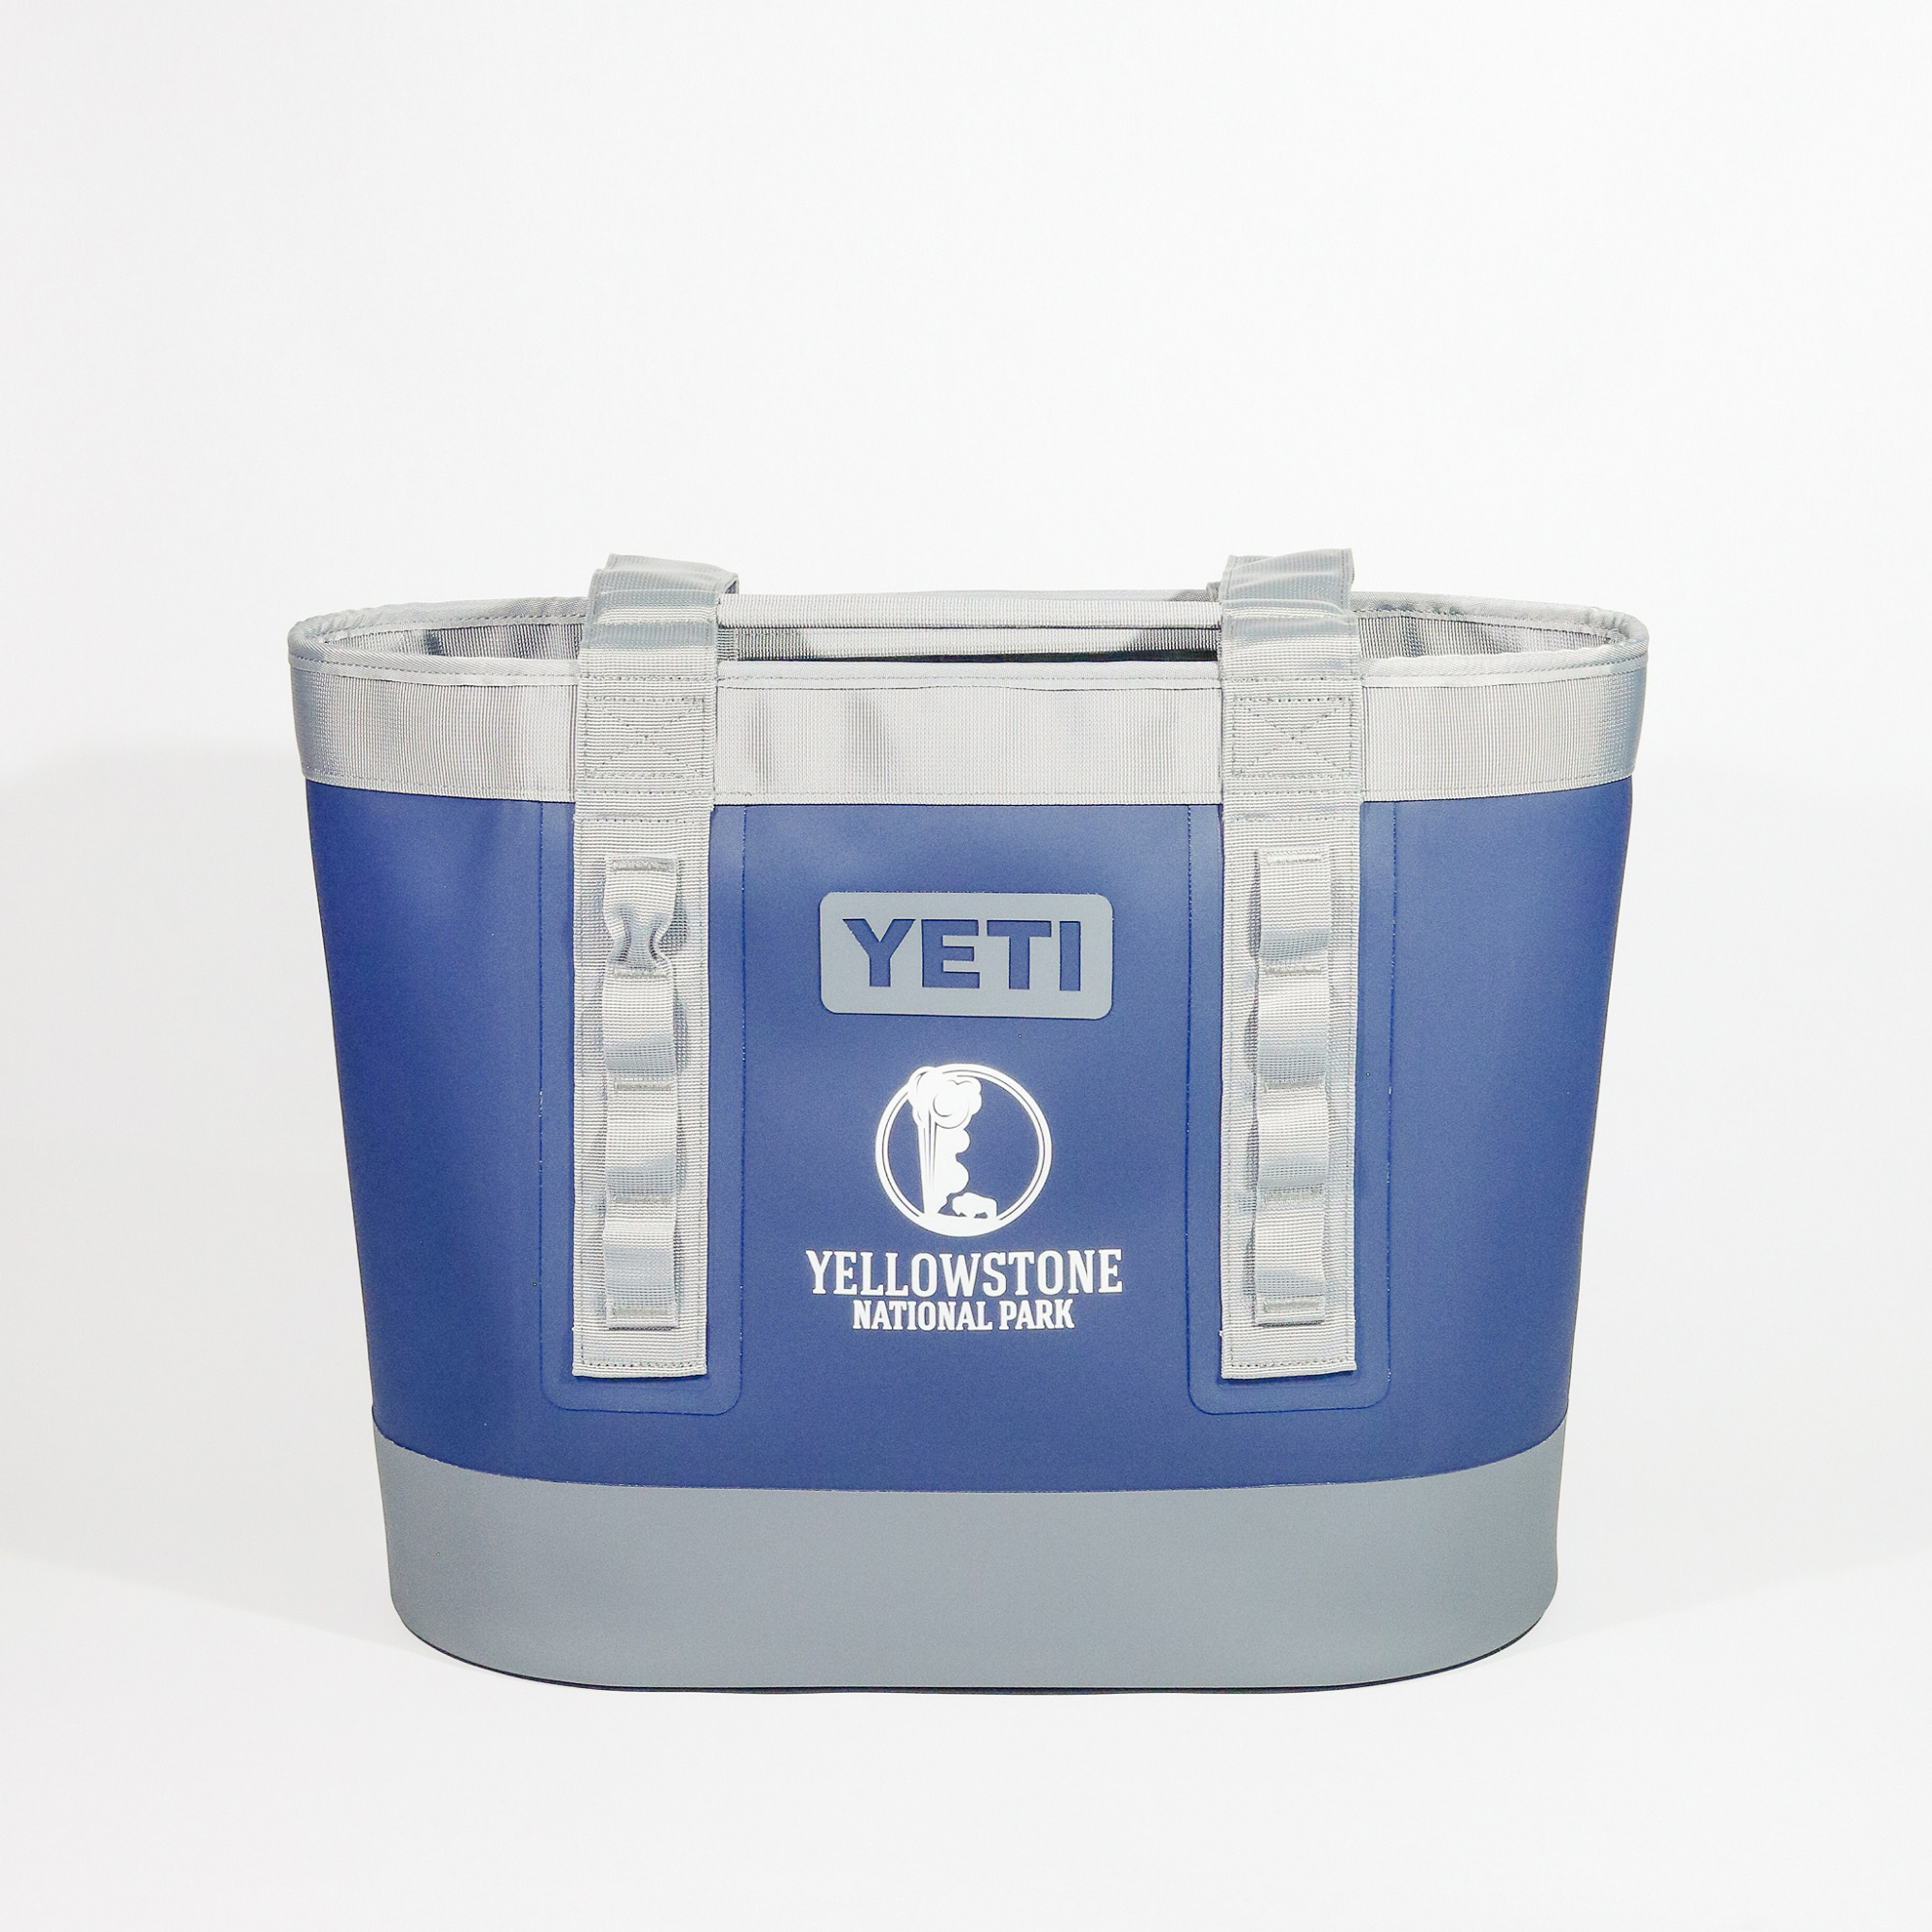 YETI® Releases New Premium Bags Collection Designed for Both